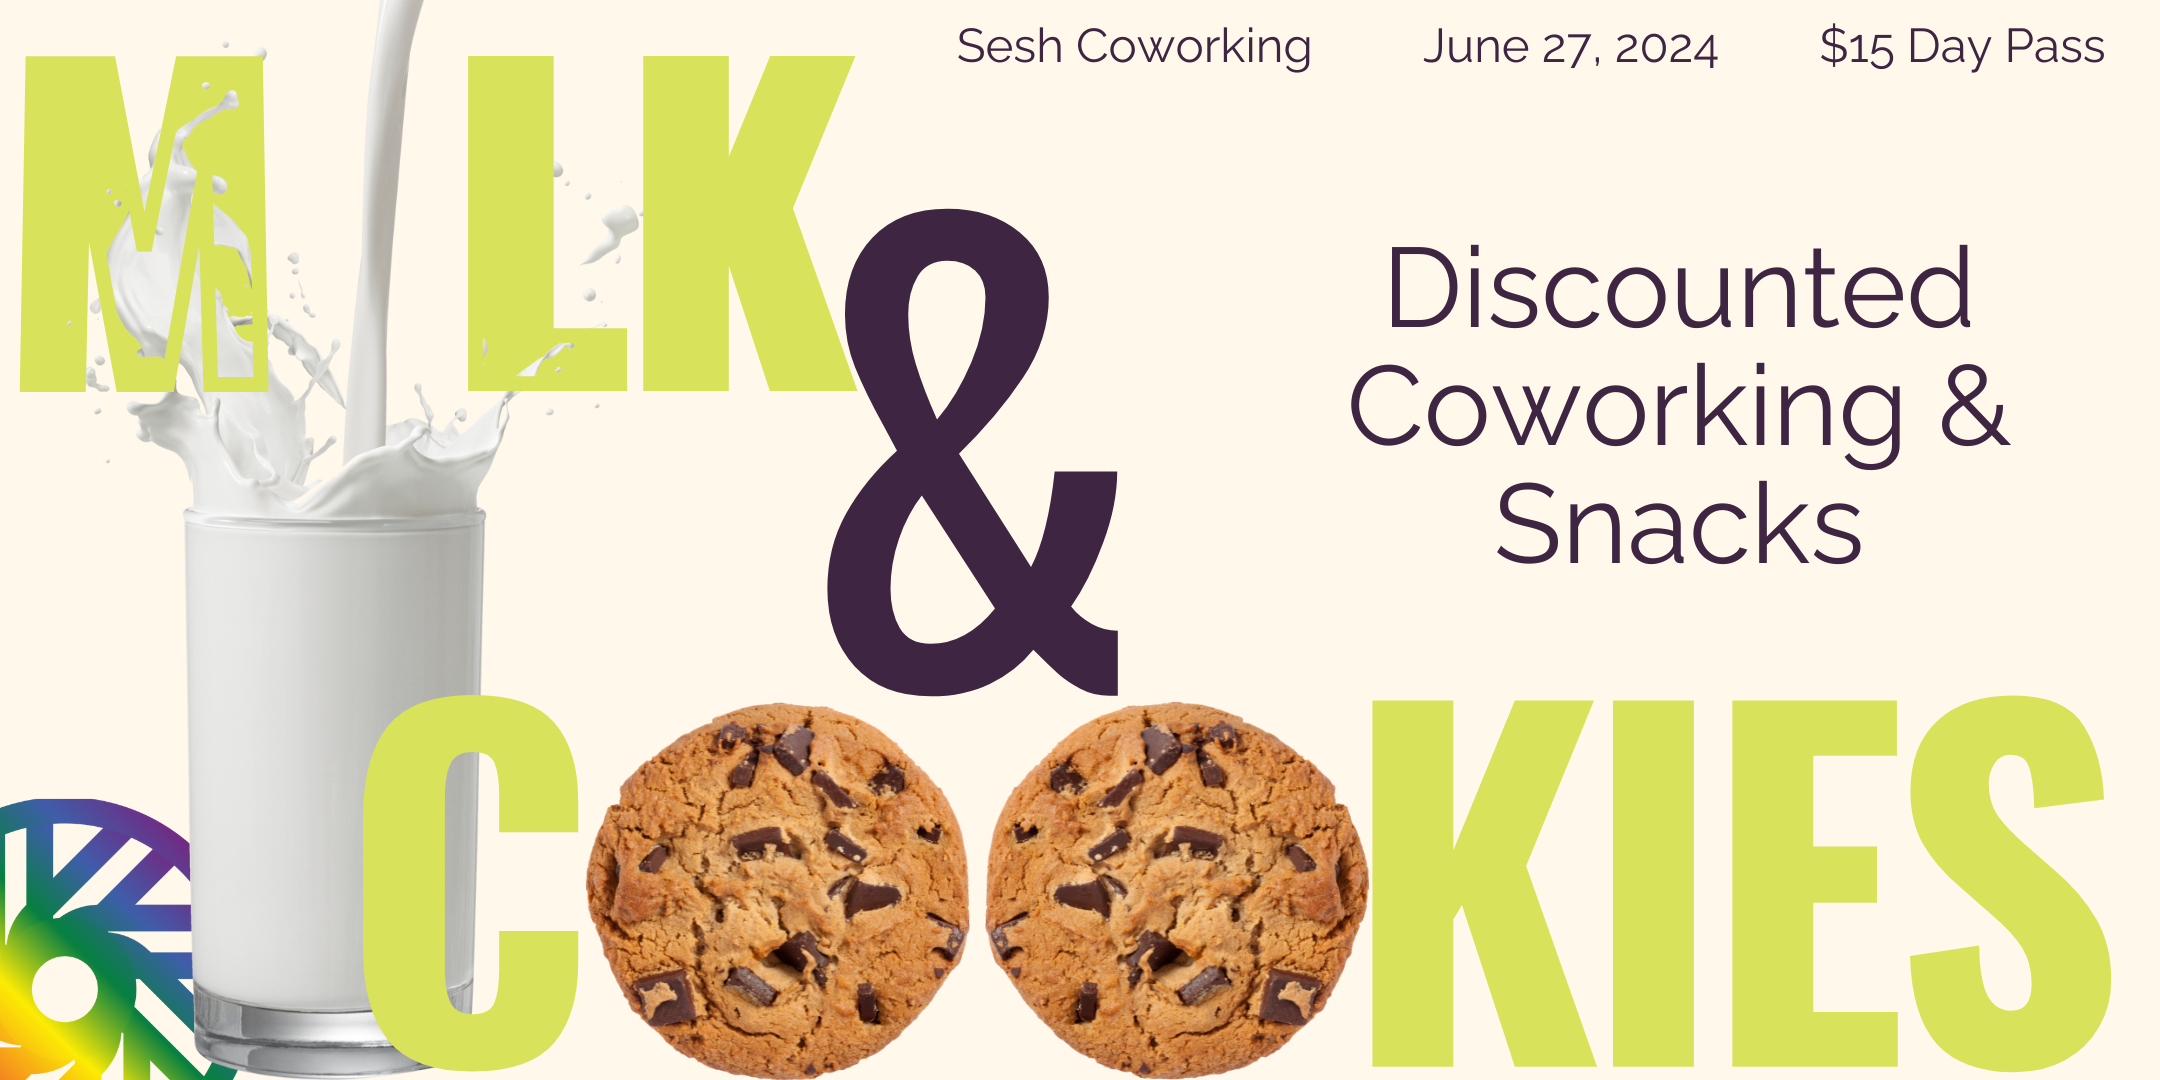 Discounted Coworking at Sesh, June 17, $15